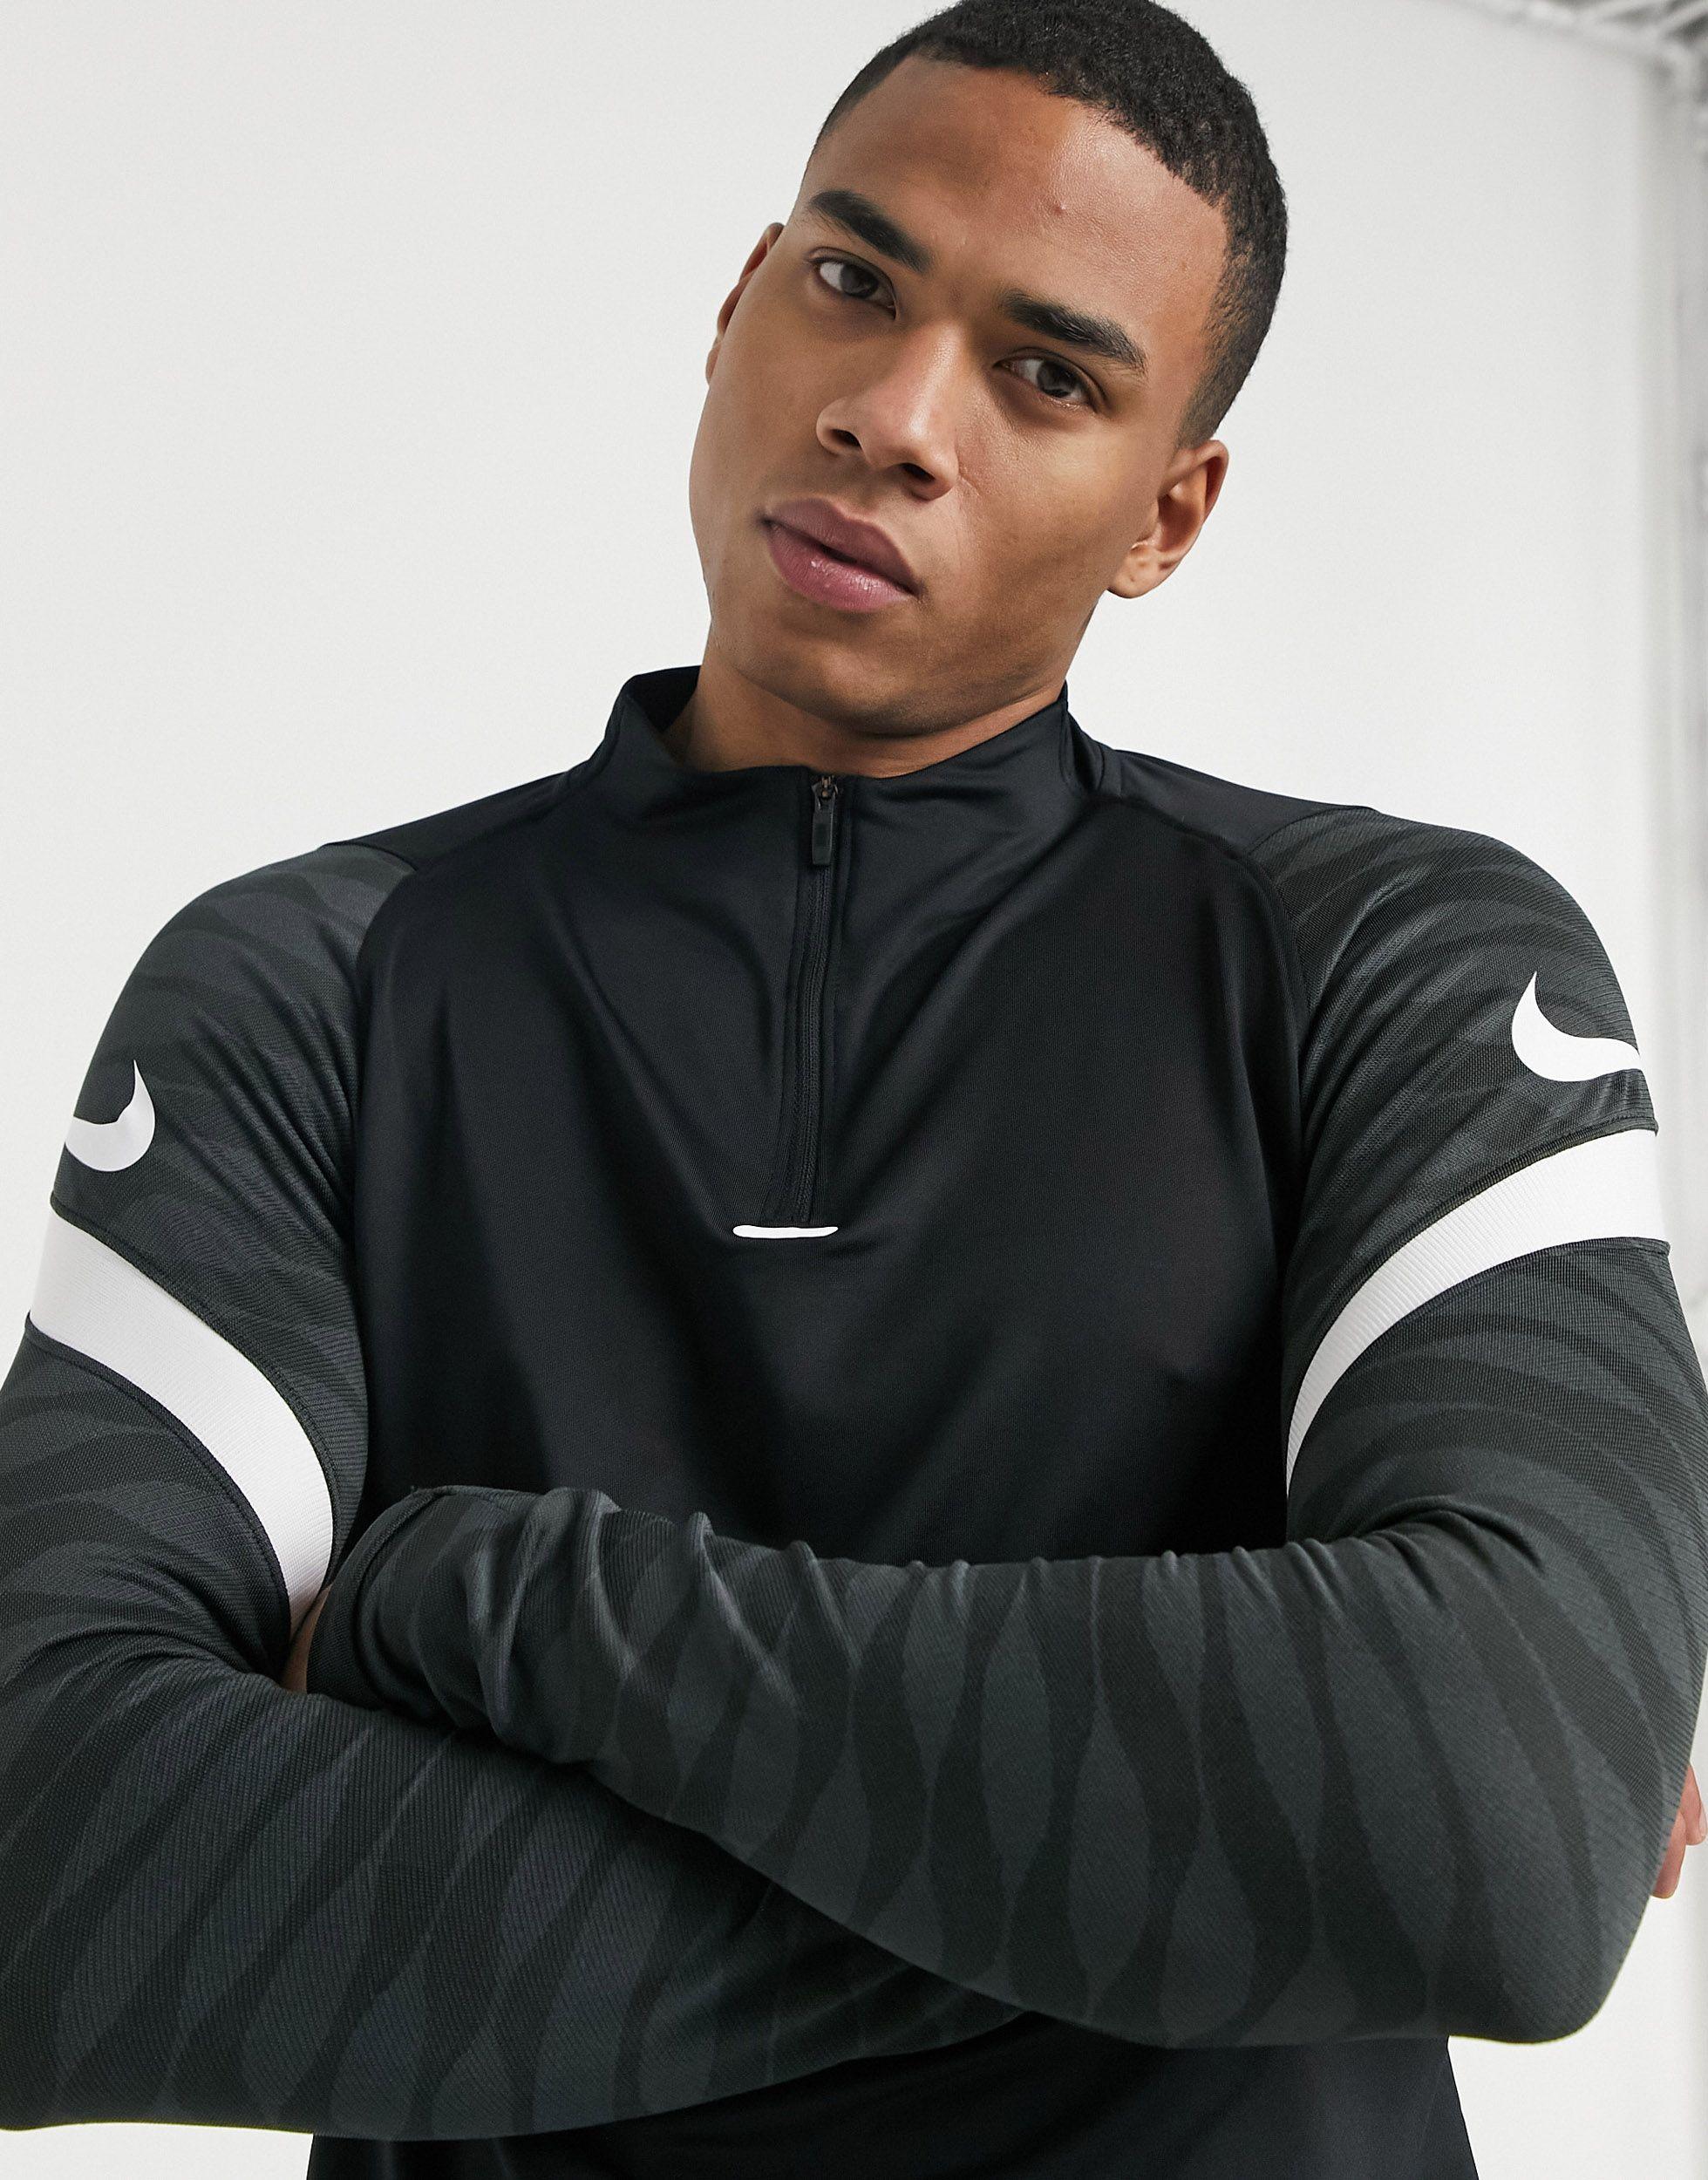 Nike Football Strike Drill Top in Black for Men - Save 21% | Lyst